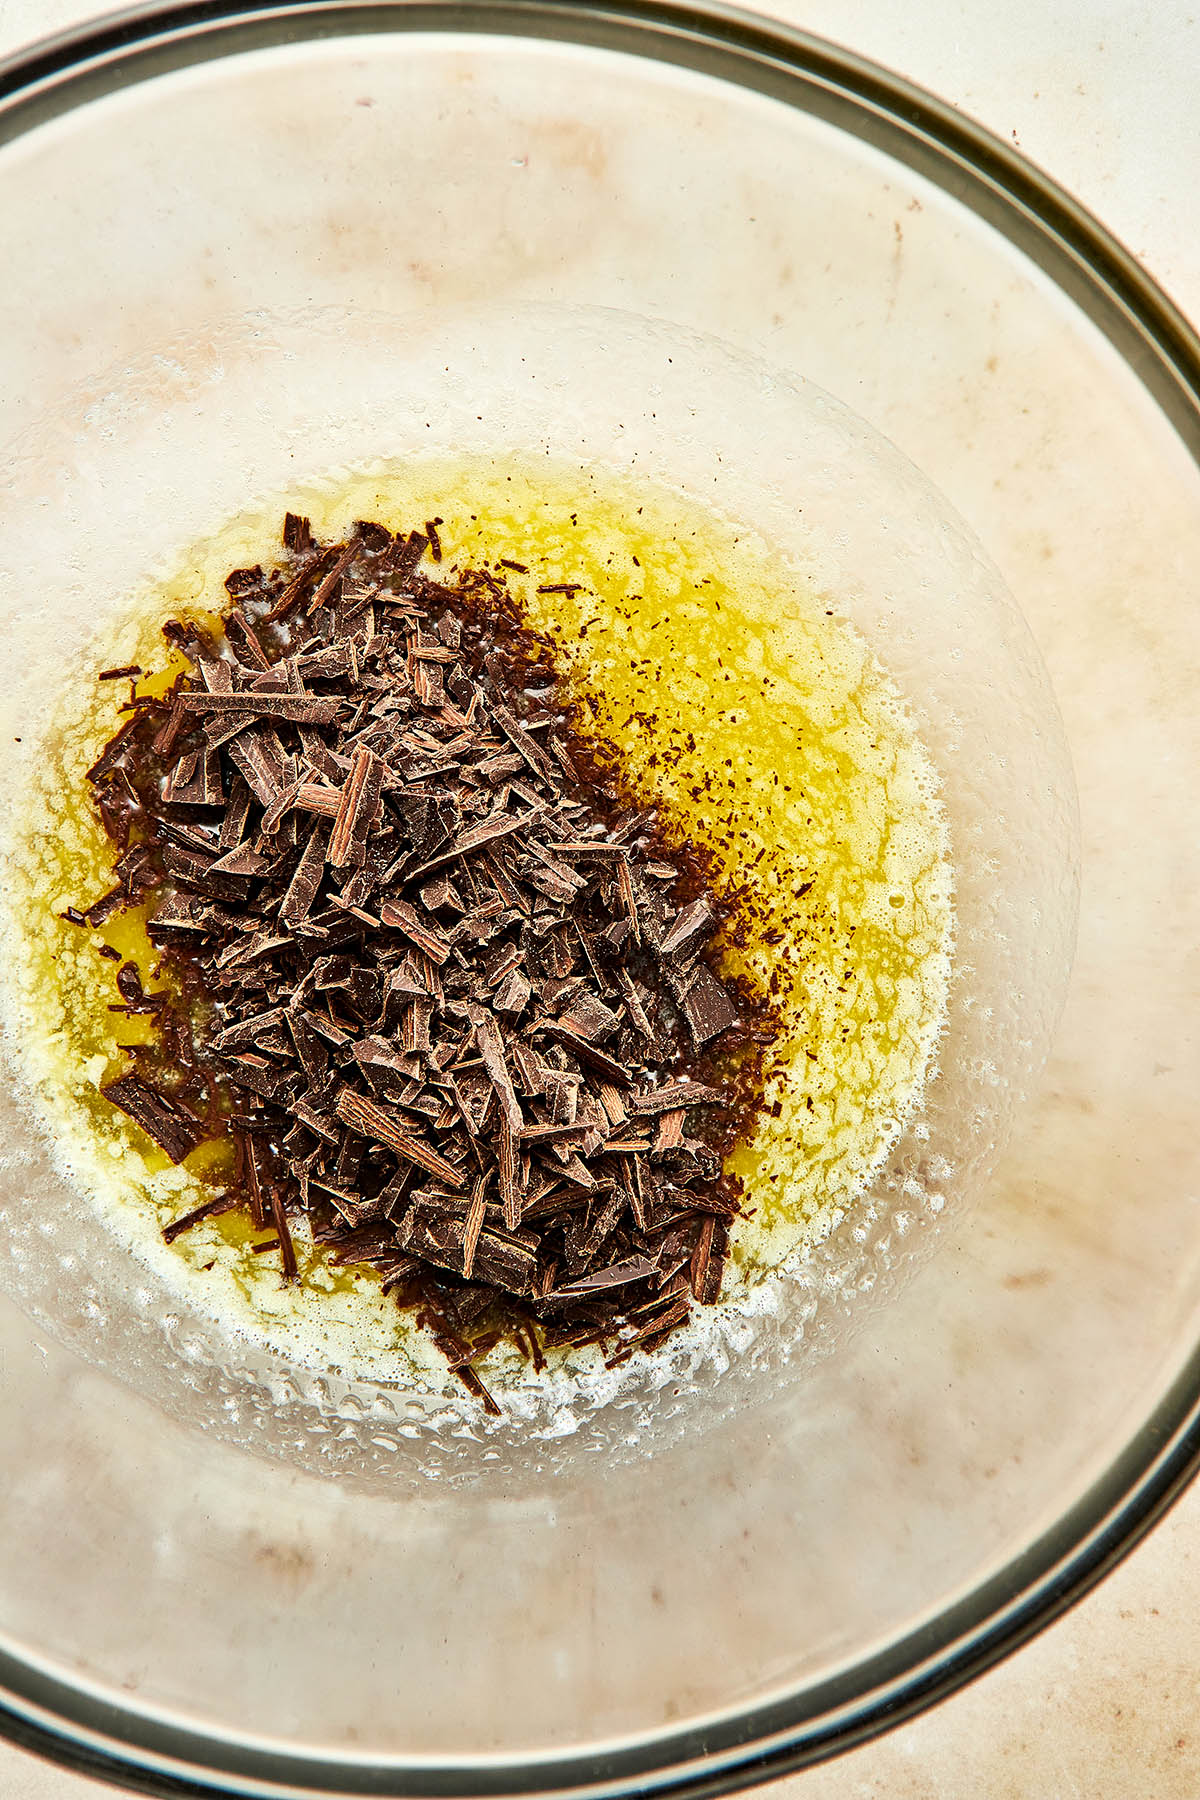 Finely chopped chocolate in a bowl of melted butter.